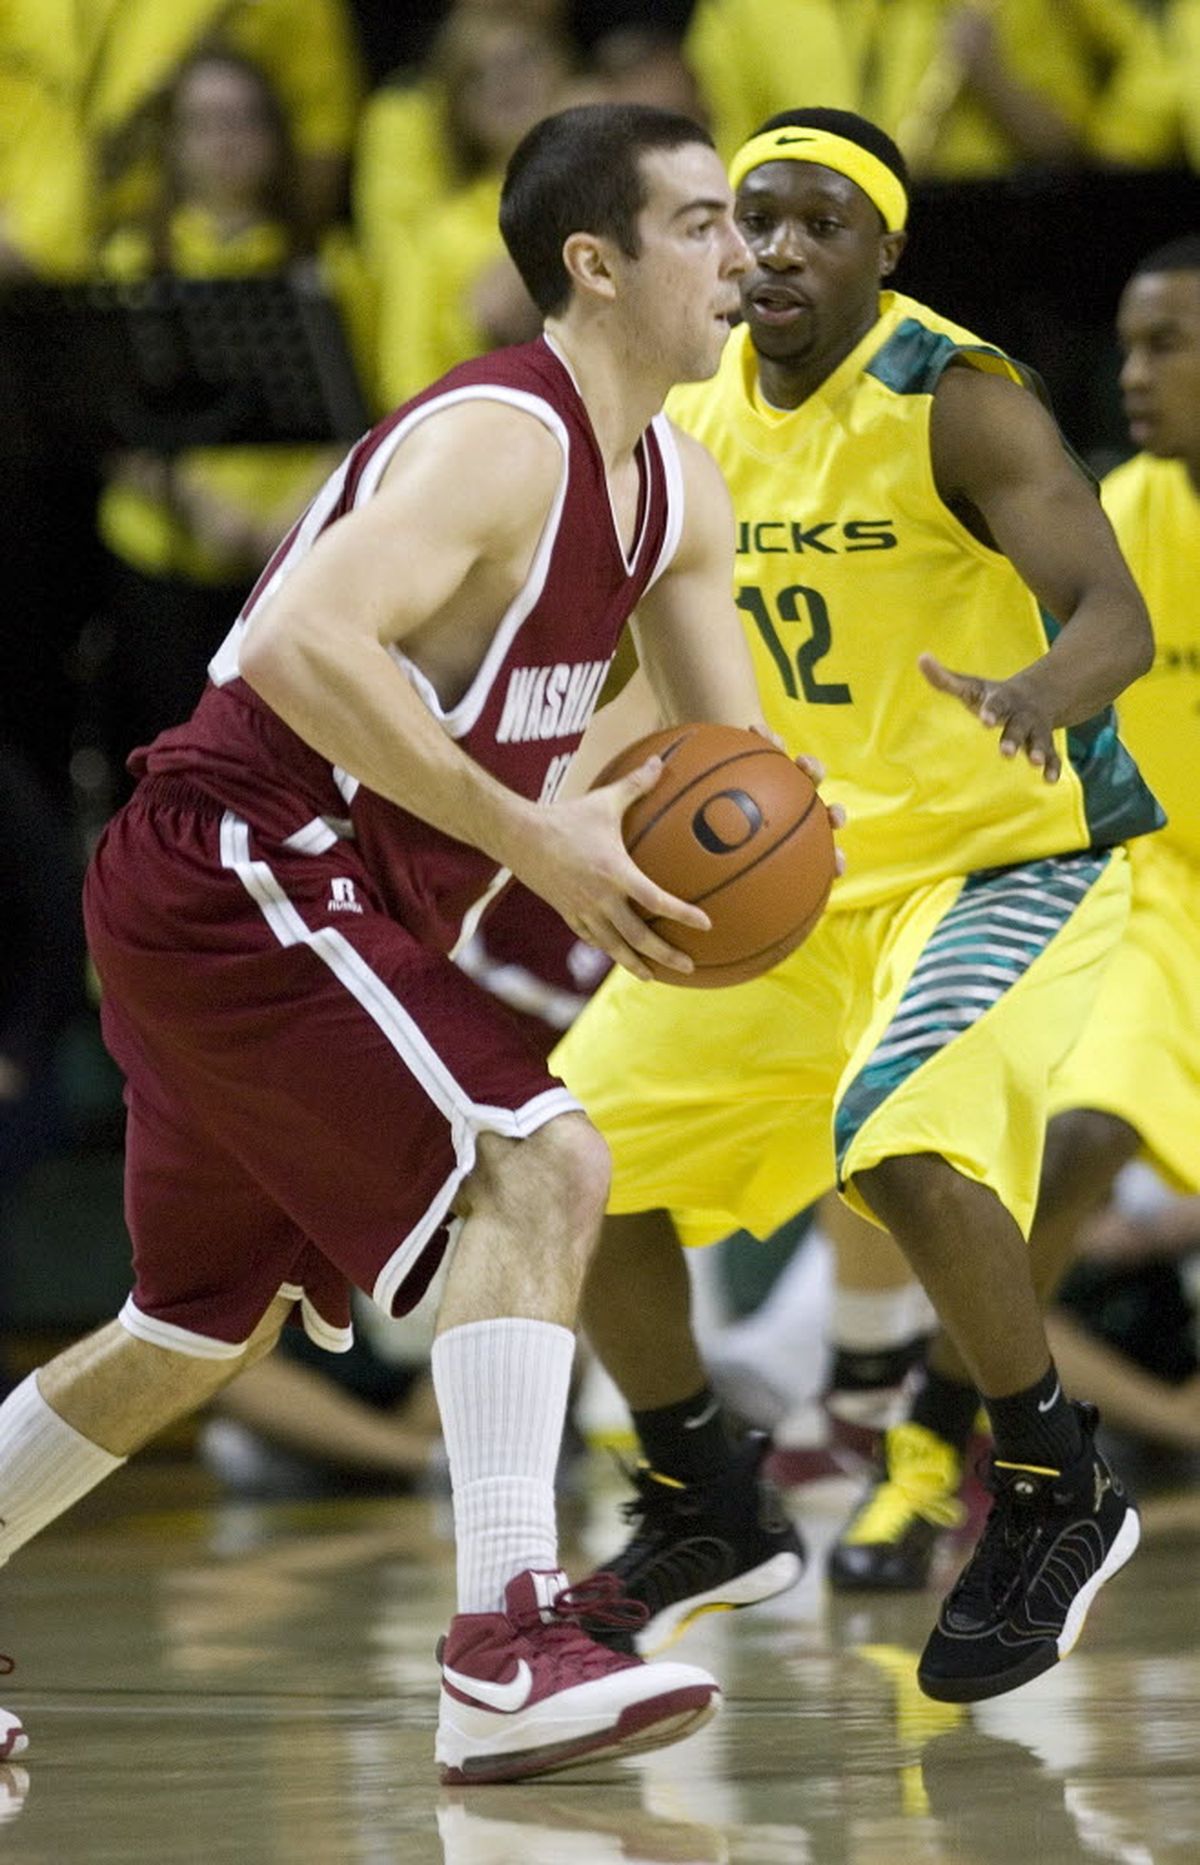 Washington State guard Taylor Rochestie, left, looks to pass against Oregon guard Tajuan Porter during the second half of their NCAA basketball game in Eugene today. Rochestie led Washington in scoring with 30 points to beat Oregon 74-62. (Don Ryan / The Associated Press)